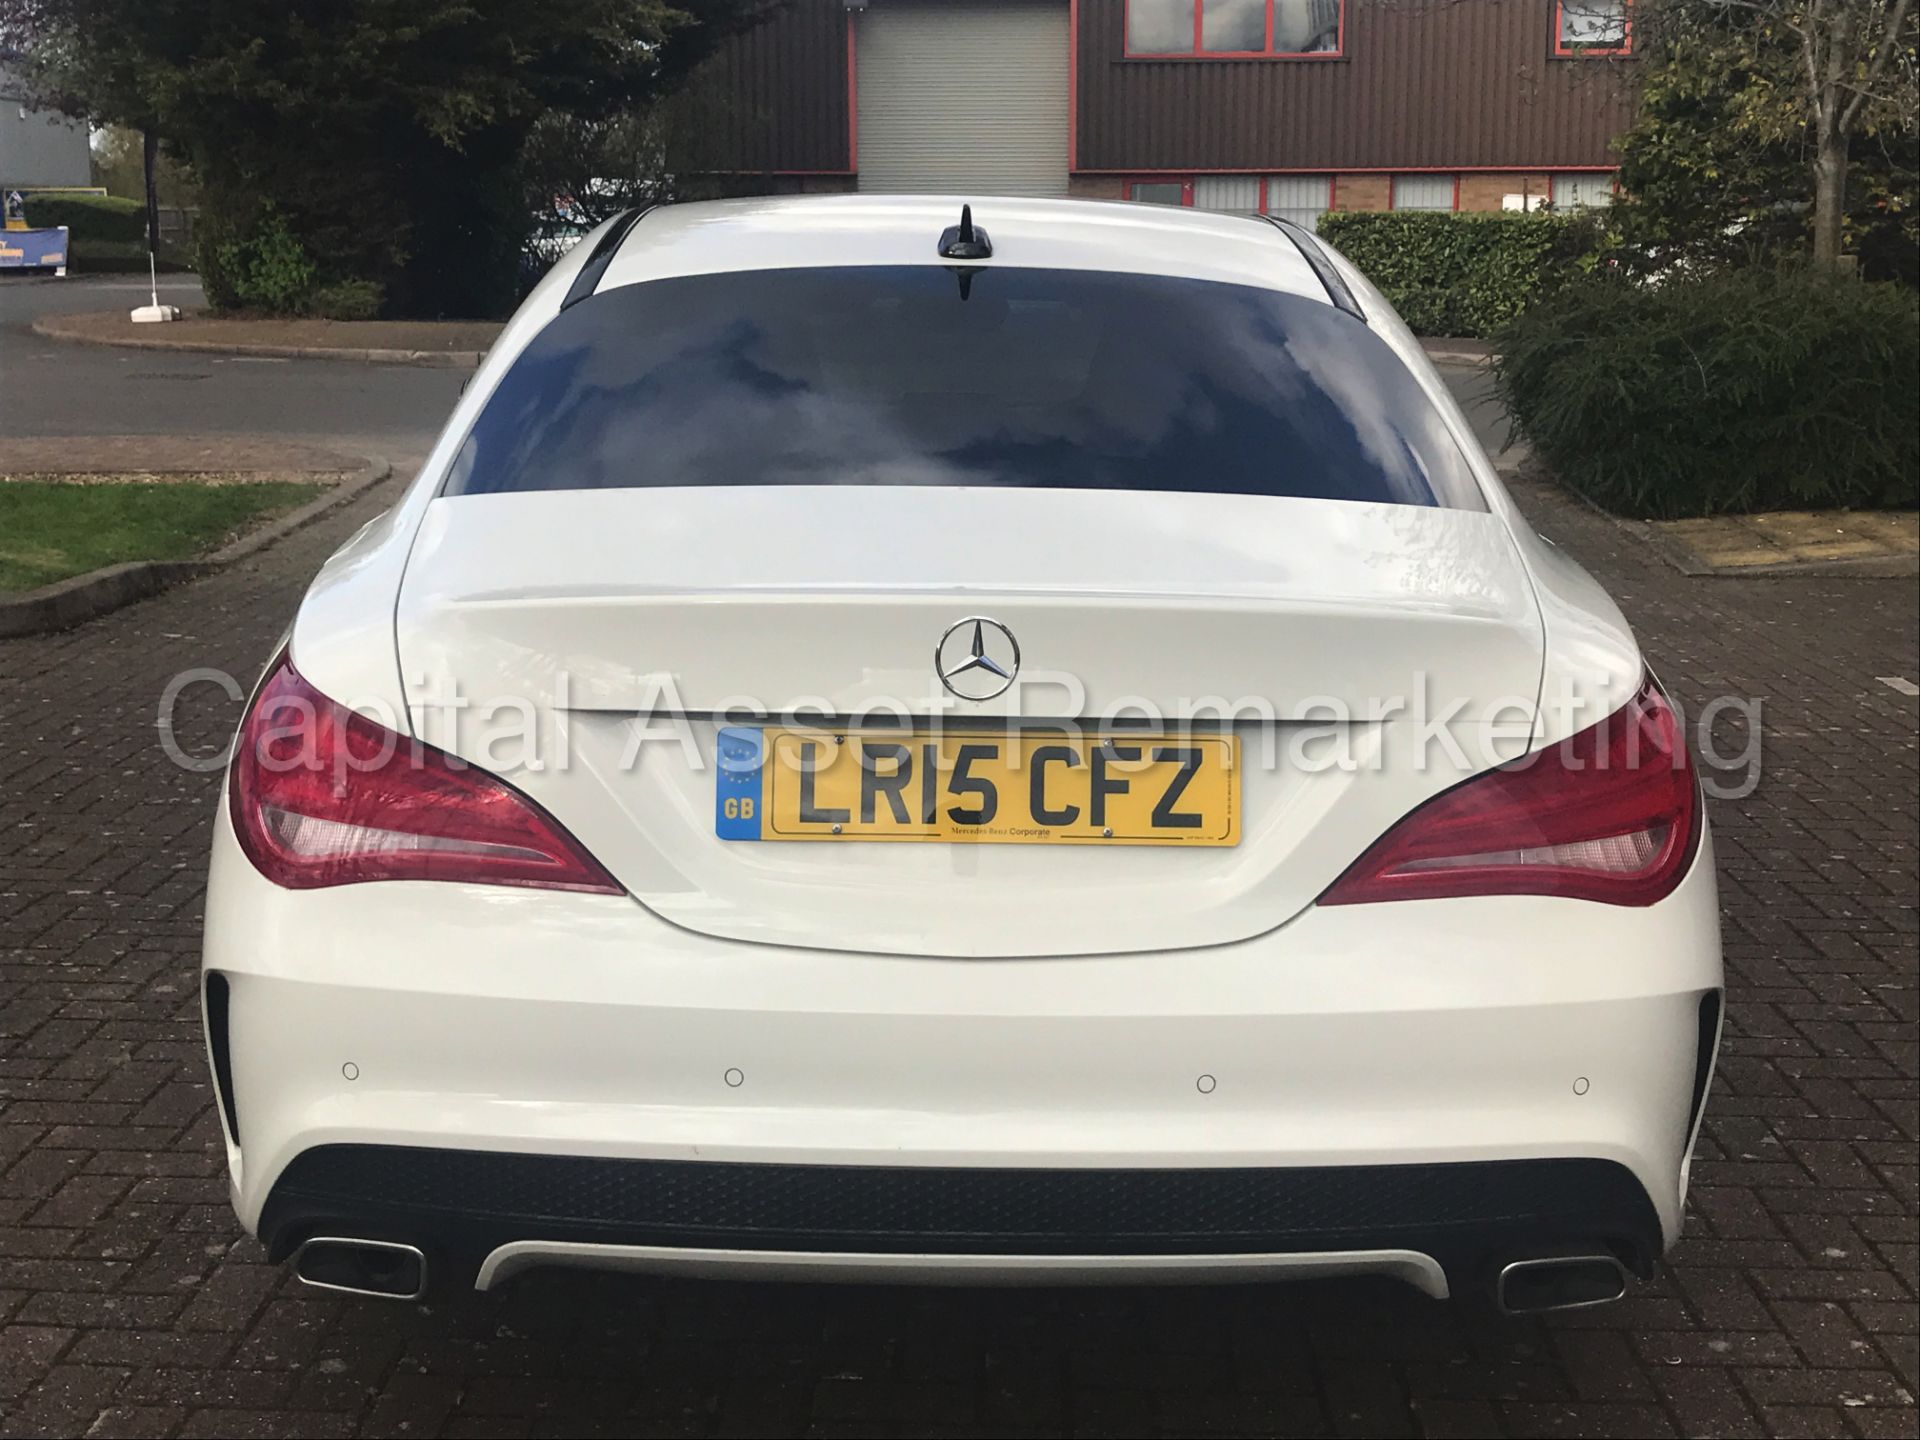 MERCEDES-BENZ CLA 220 CDI 'AMG SPORT' (2015) '7 DCT AUTO - STOP/START - SAT NAV' **NIGHT PACKAGE** - Image 7 of 33